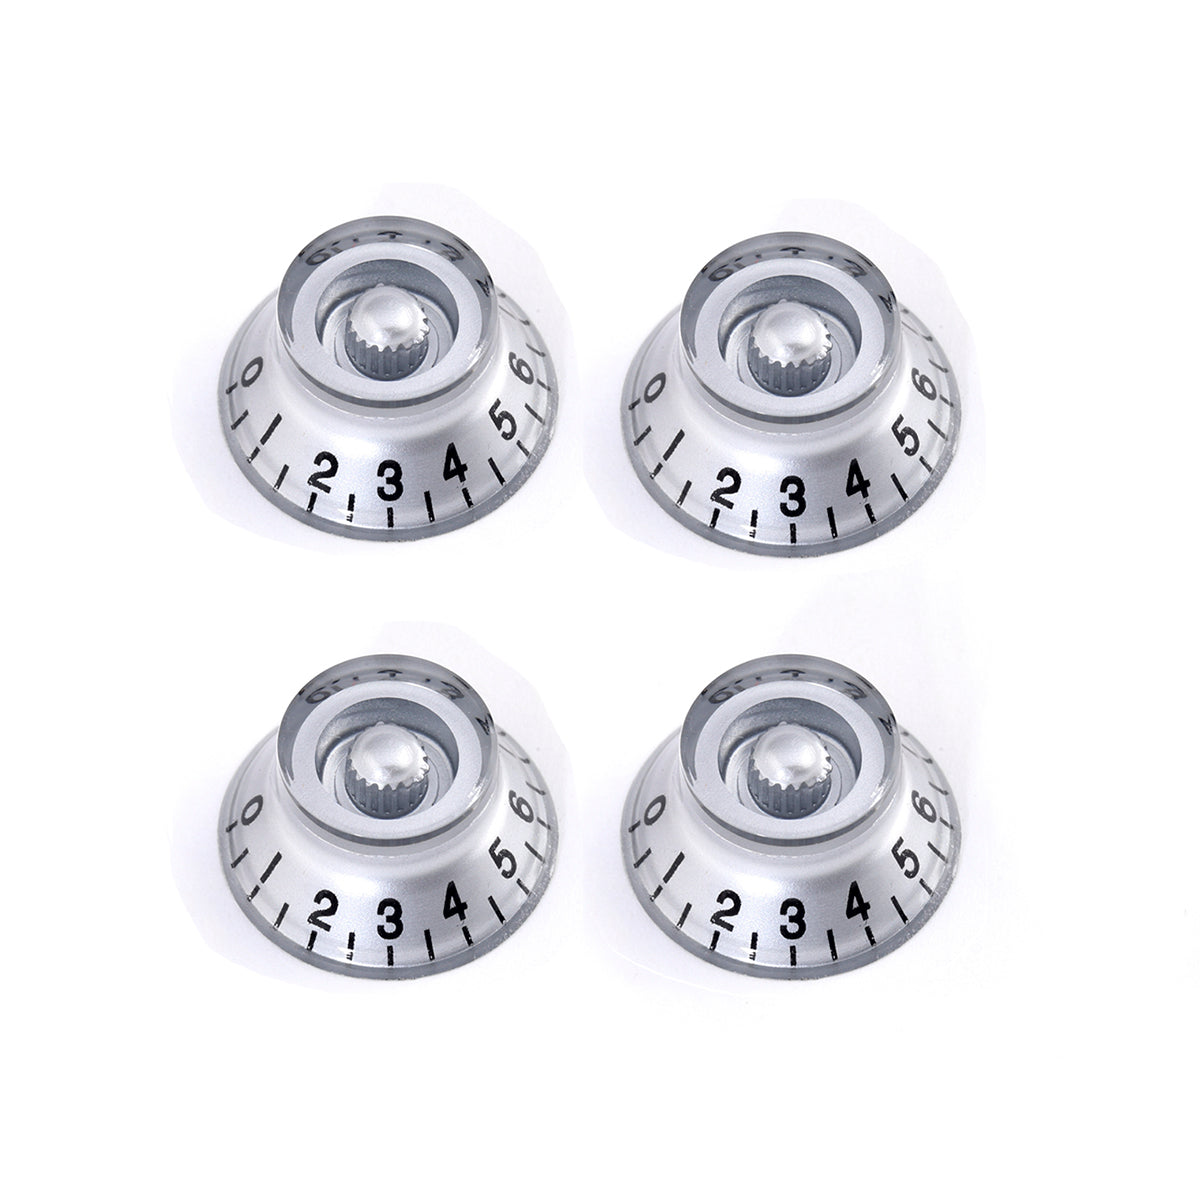 Musiclily Metric 6mm Top Hat LP Style Speed Control Knobs,Chrome with Black Number (4 Pieces)